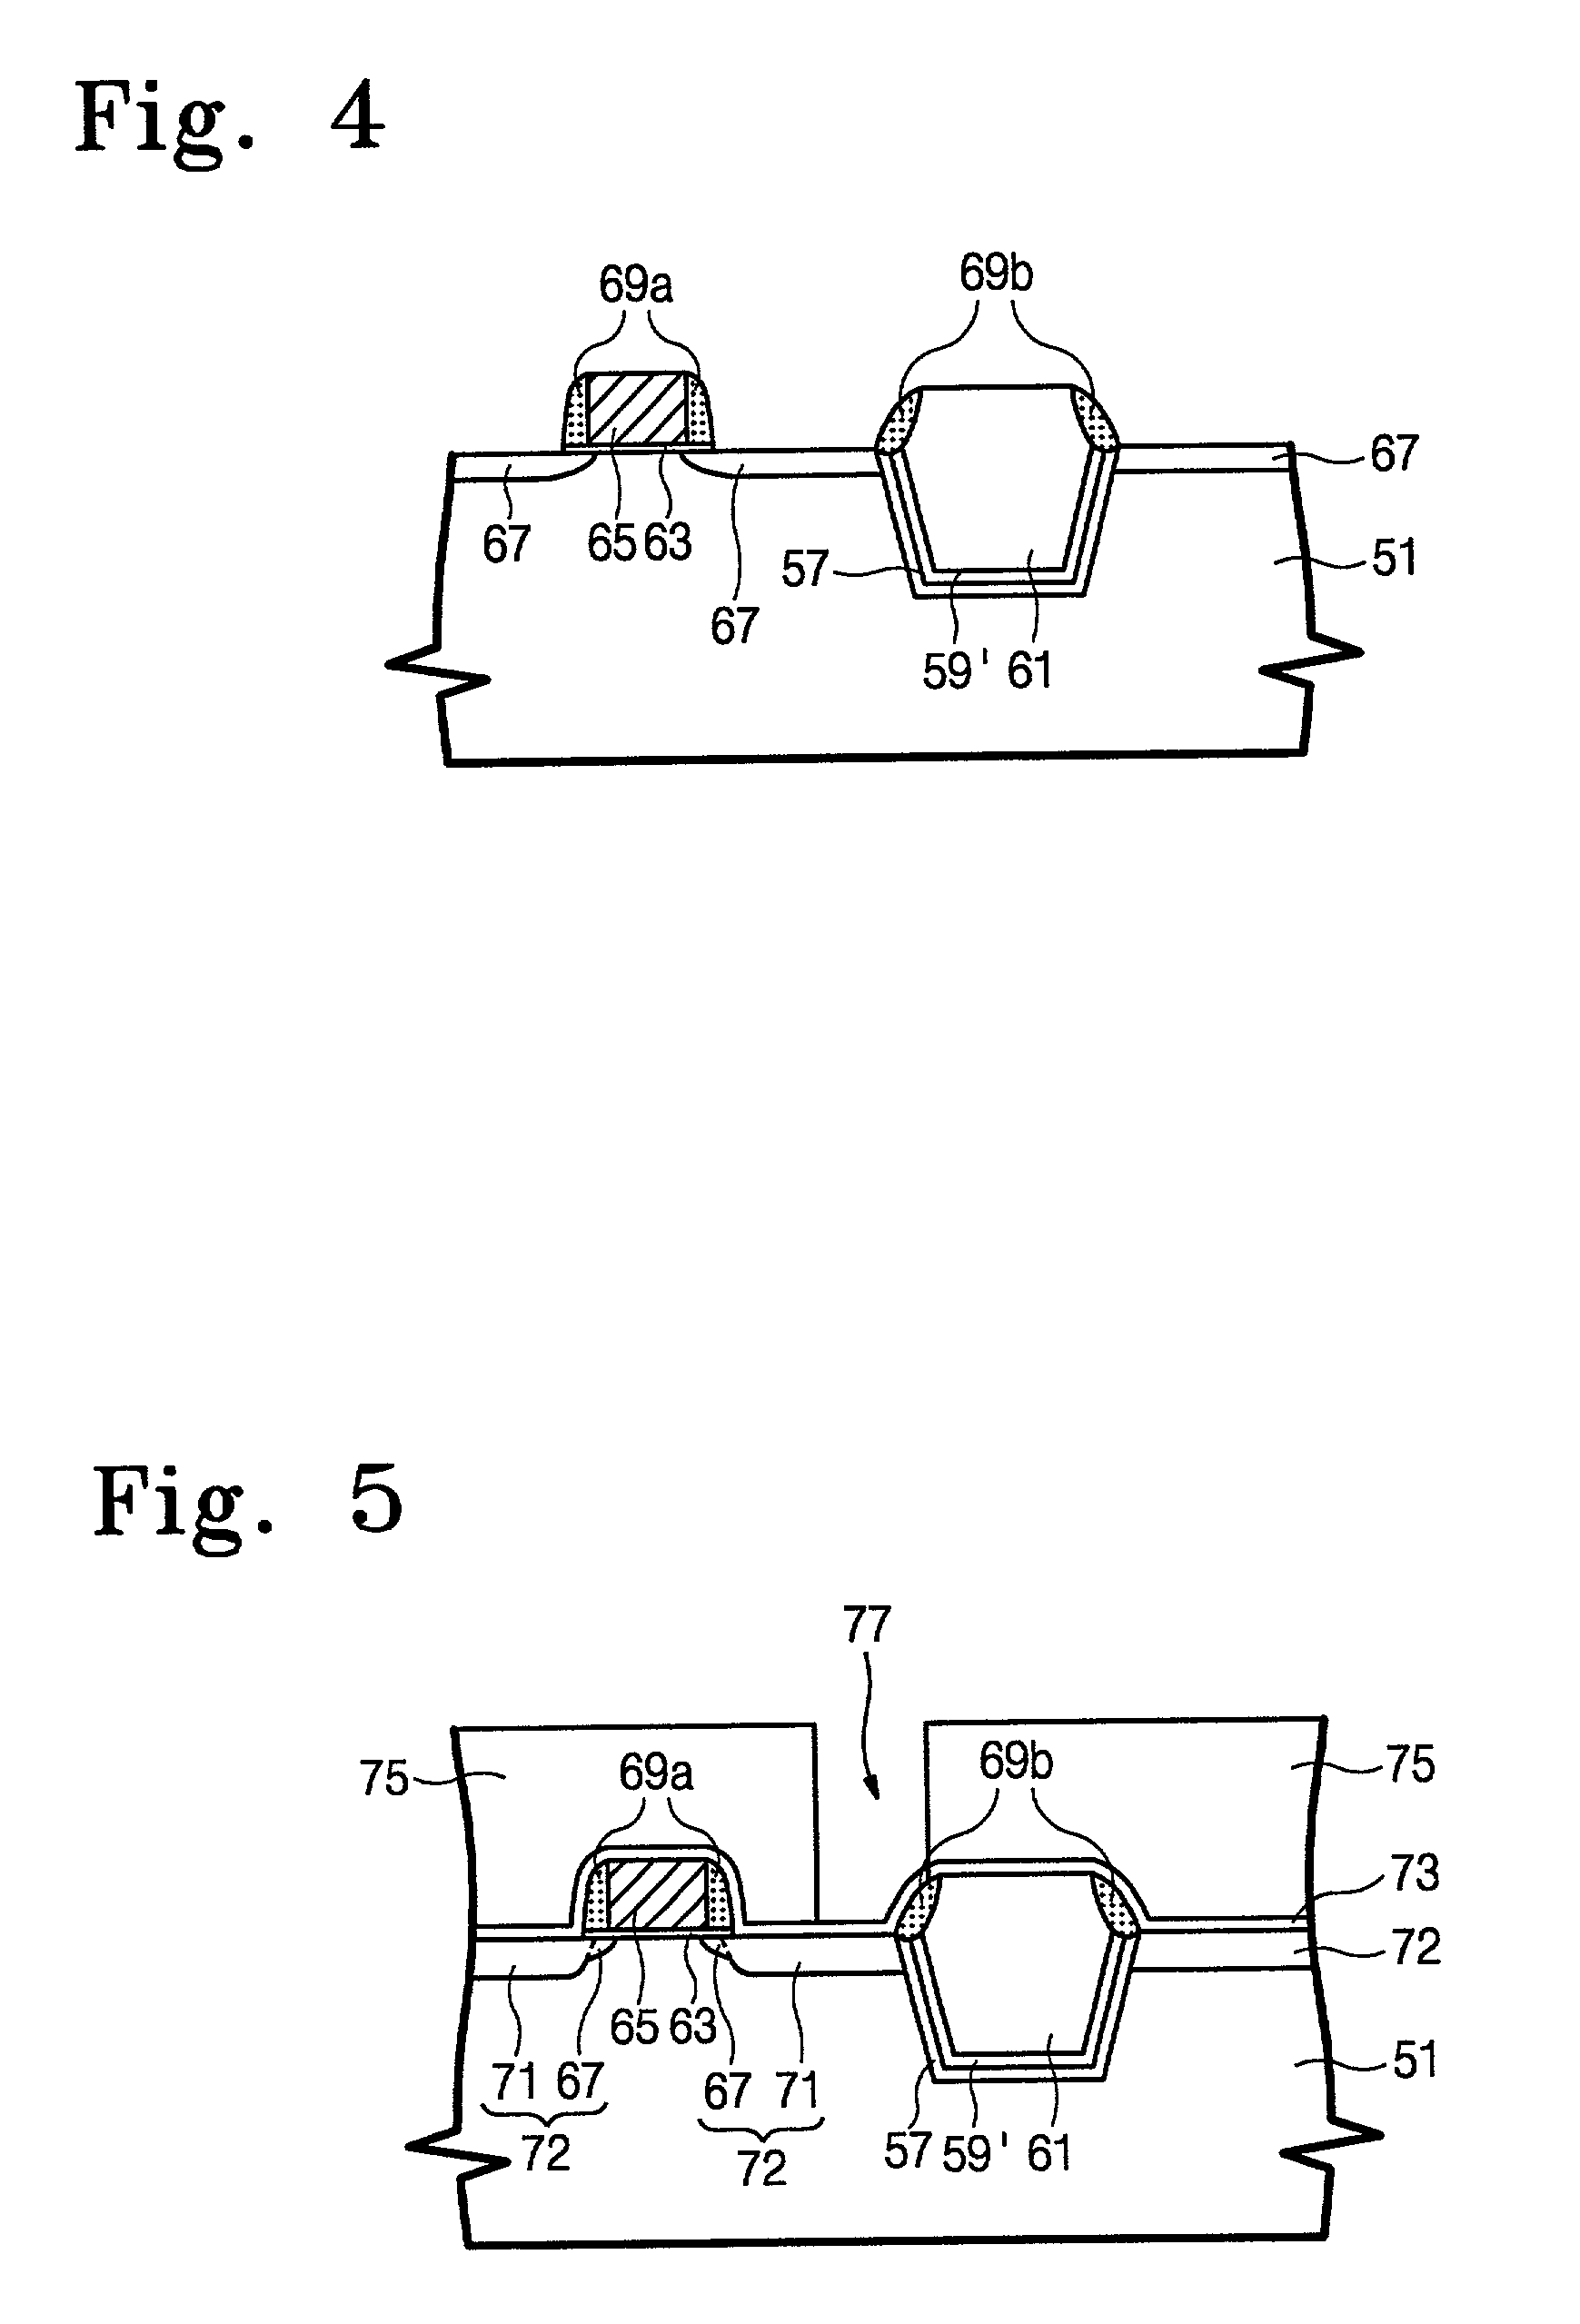 Borderless contact structure and method of forming the same